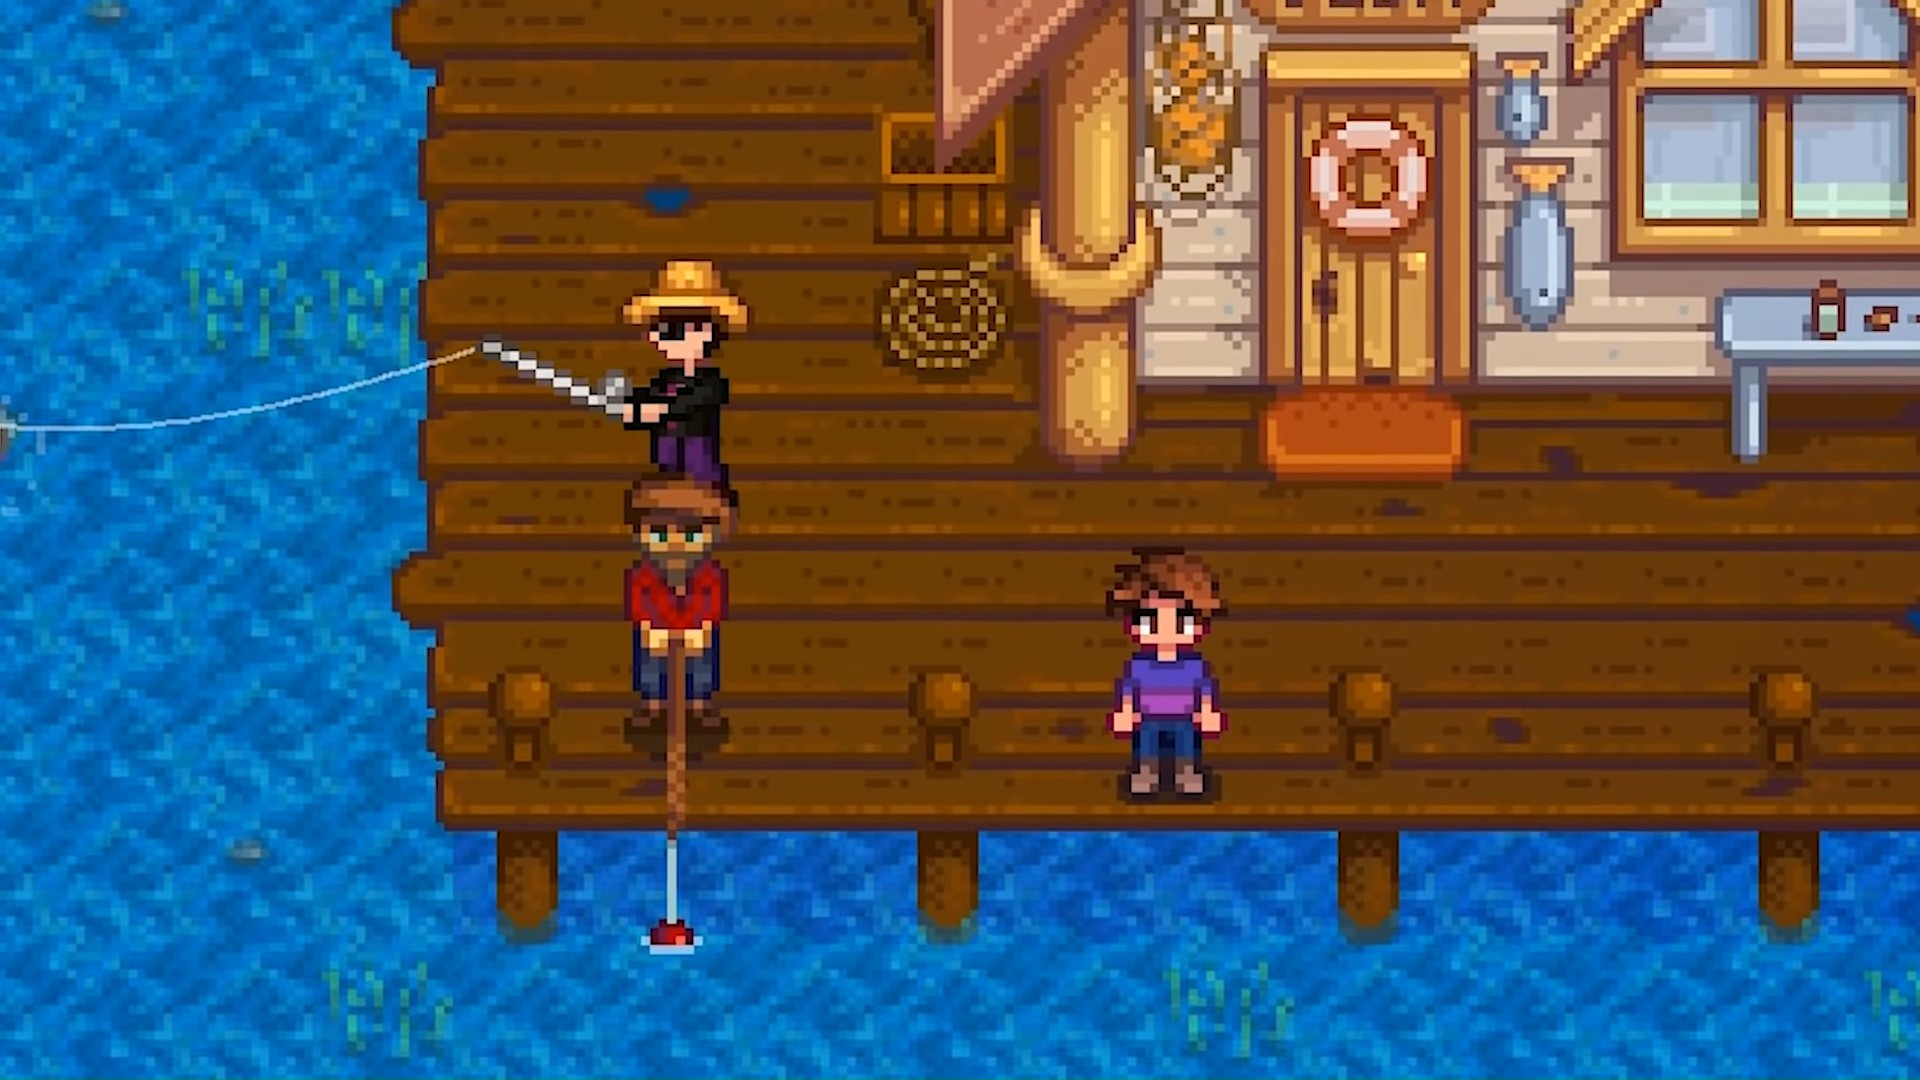 Stardew Valley Crossplay: How to Play with Friends